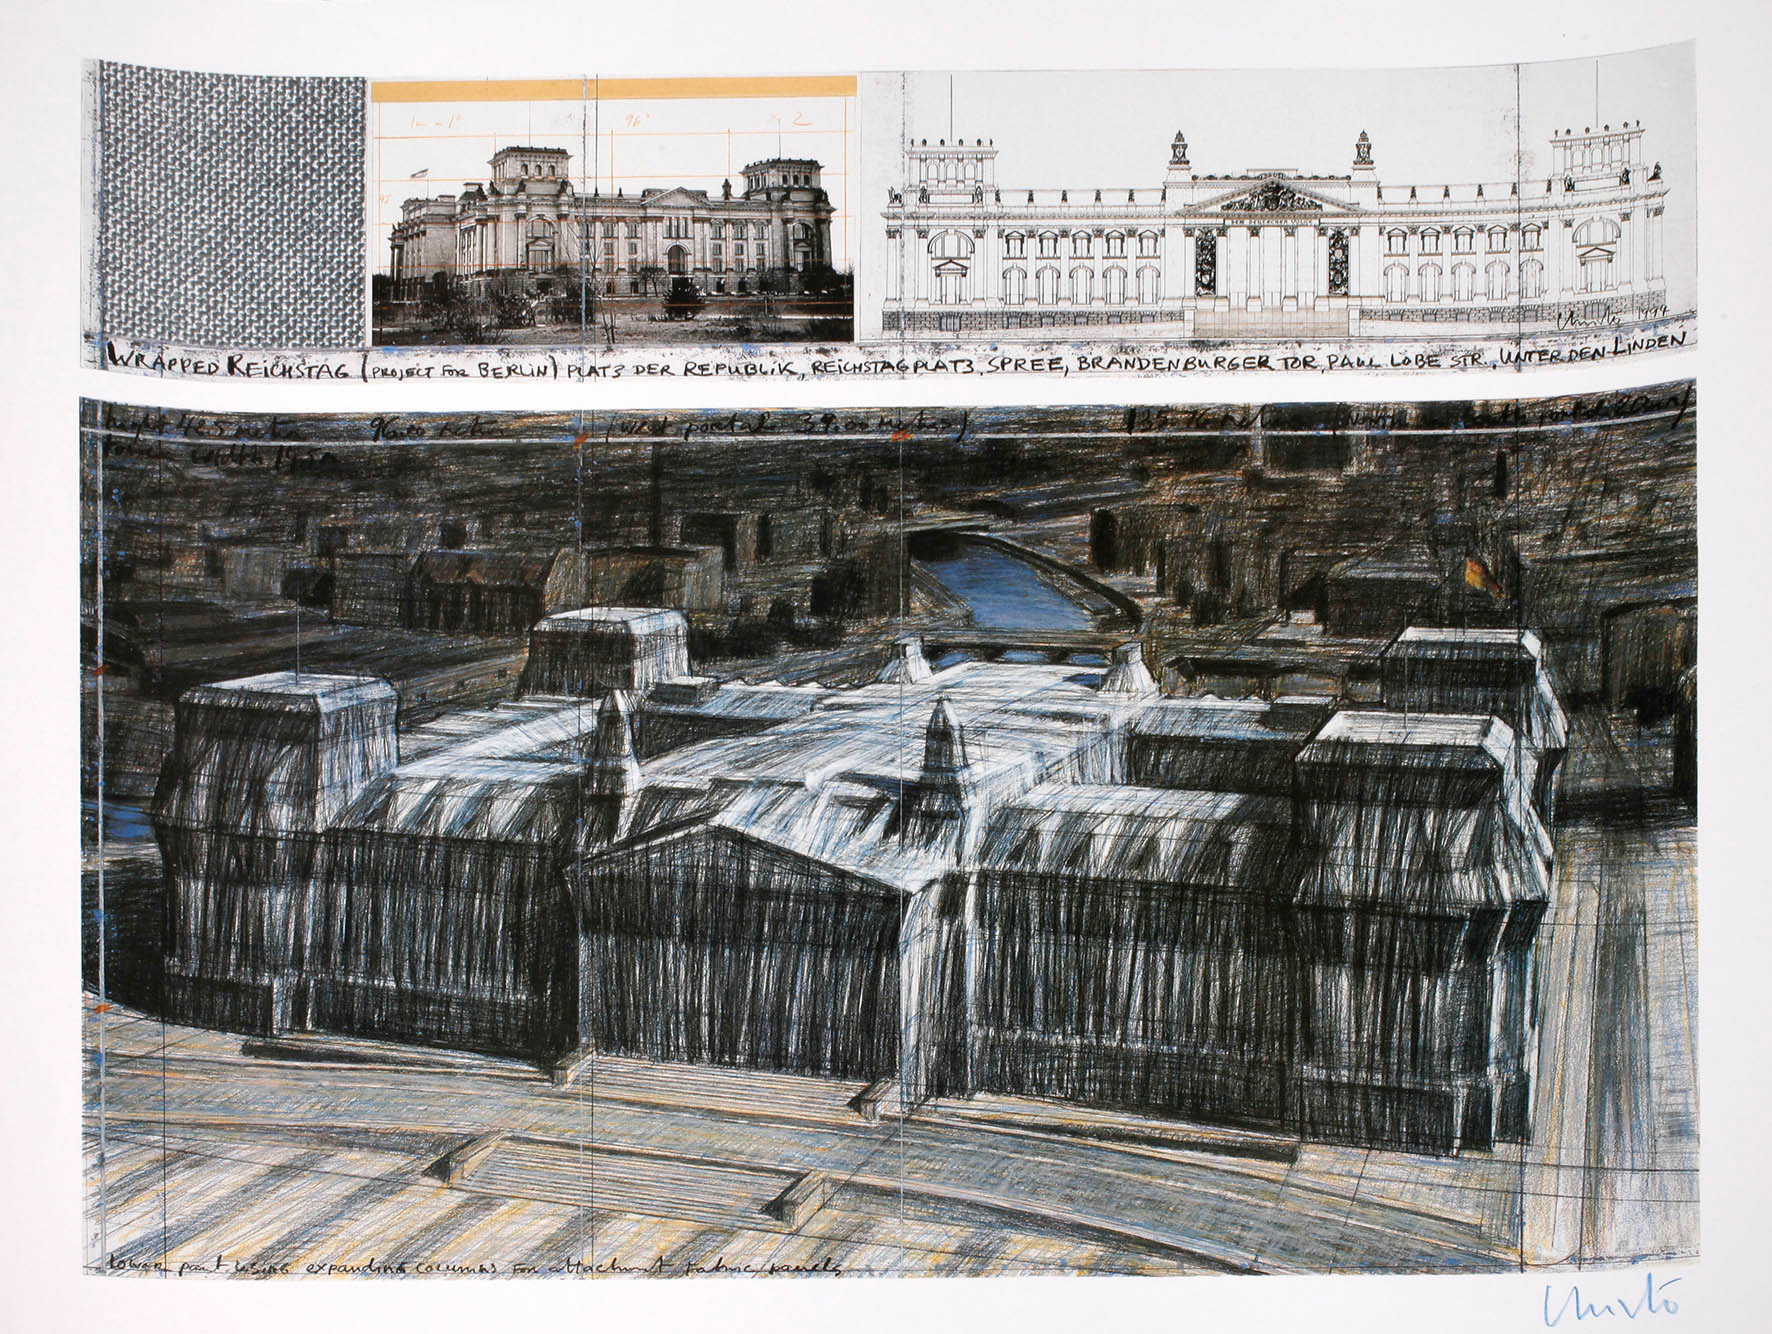 Christo & Jeanne-Claude, ”Wrapped Reichstag”